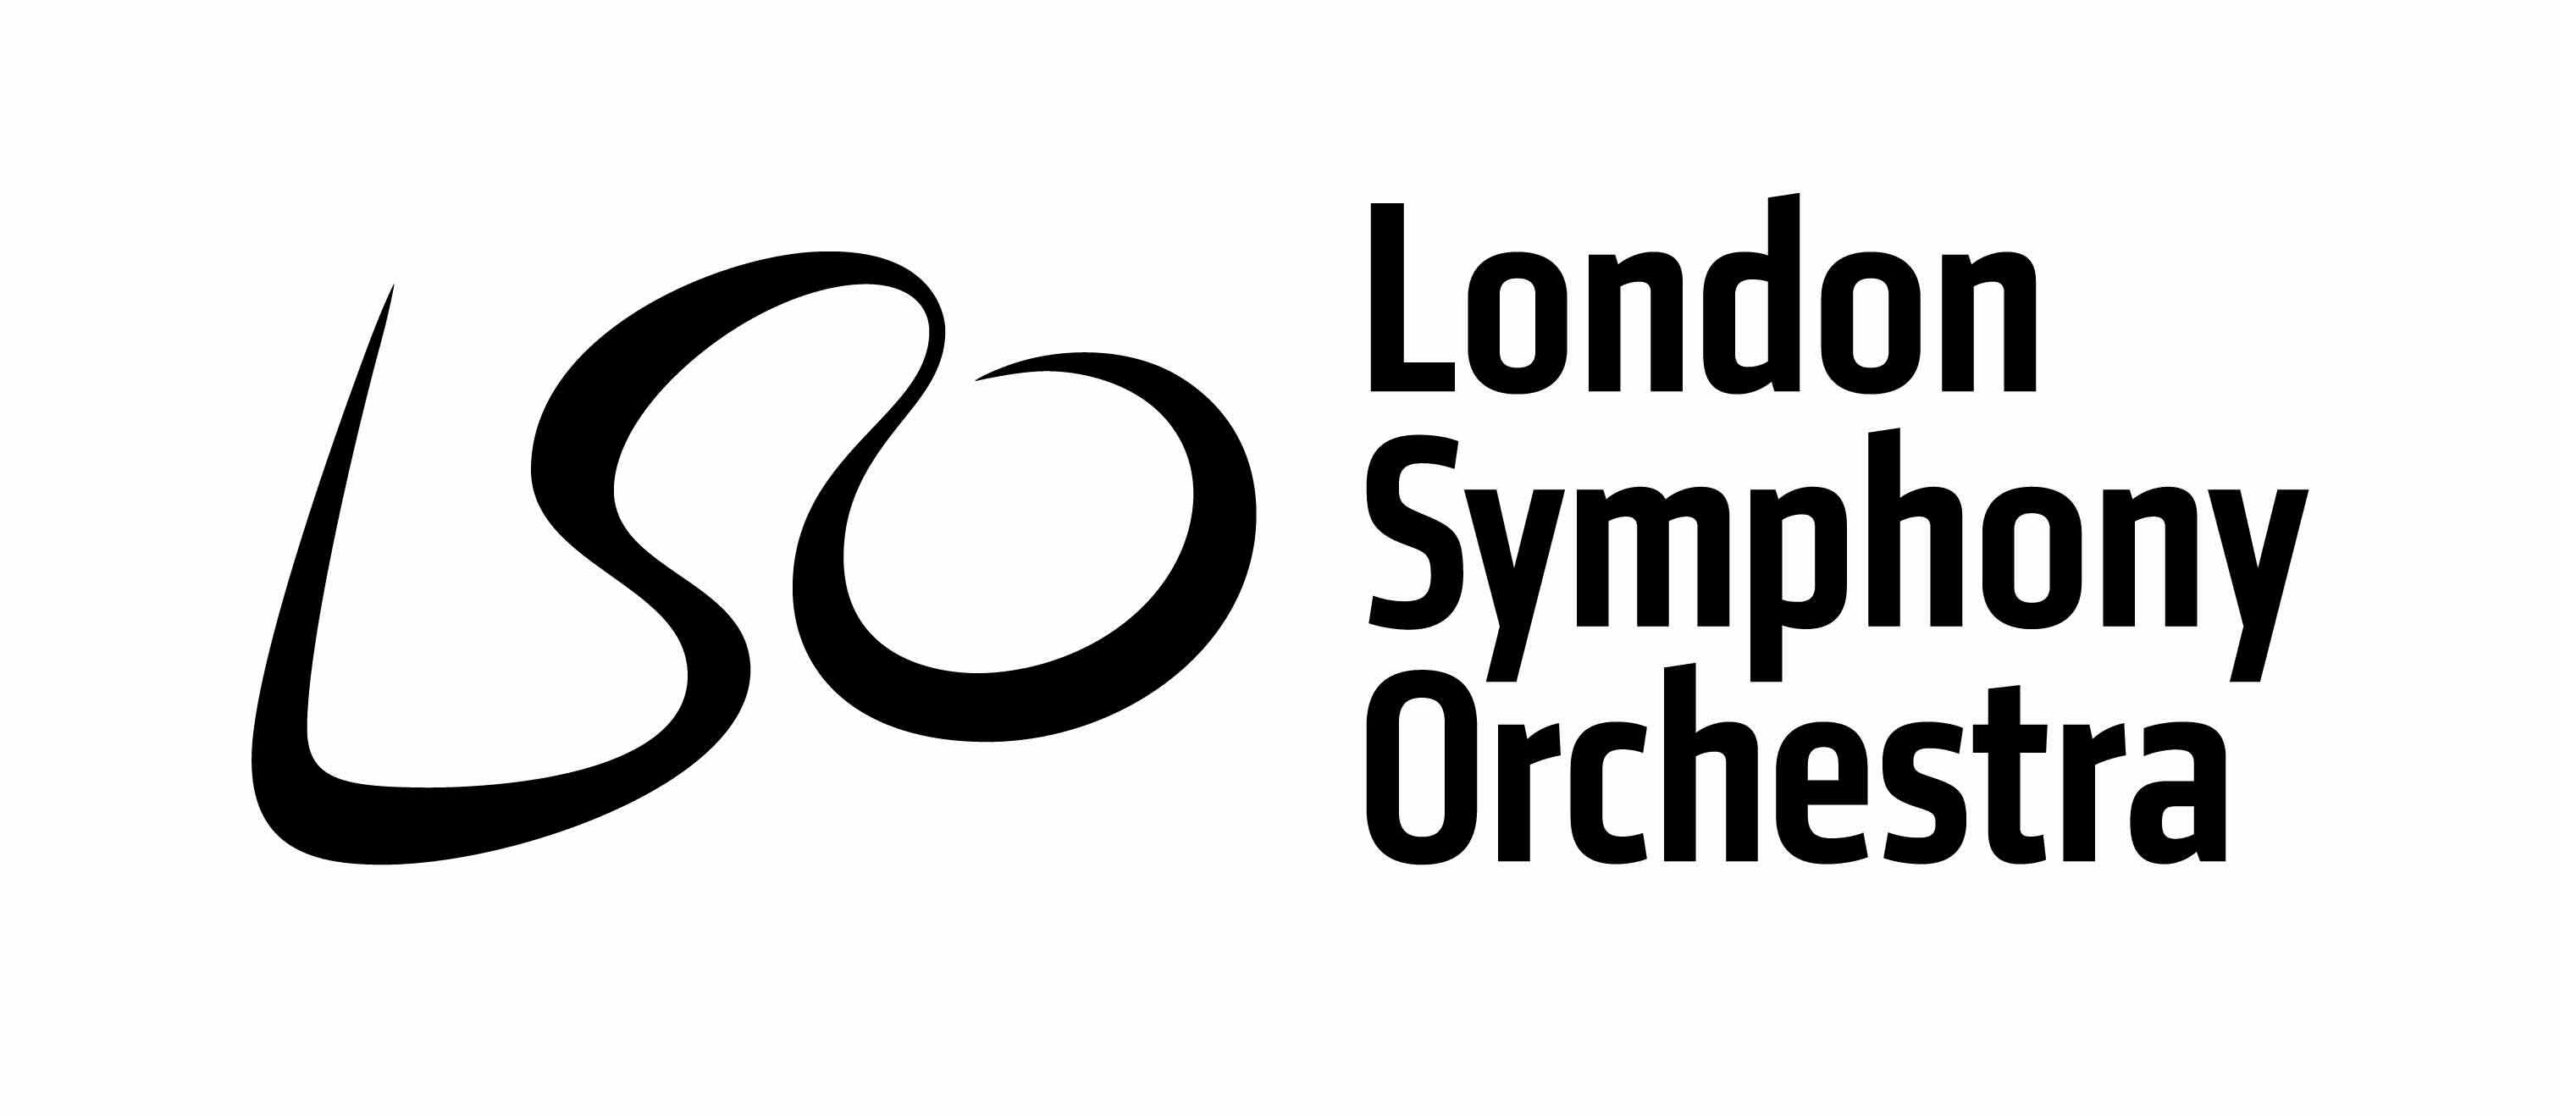 the logo for London Symphony Orchestra